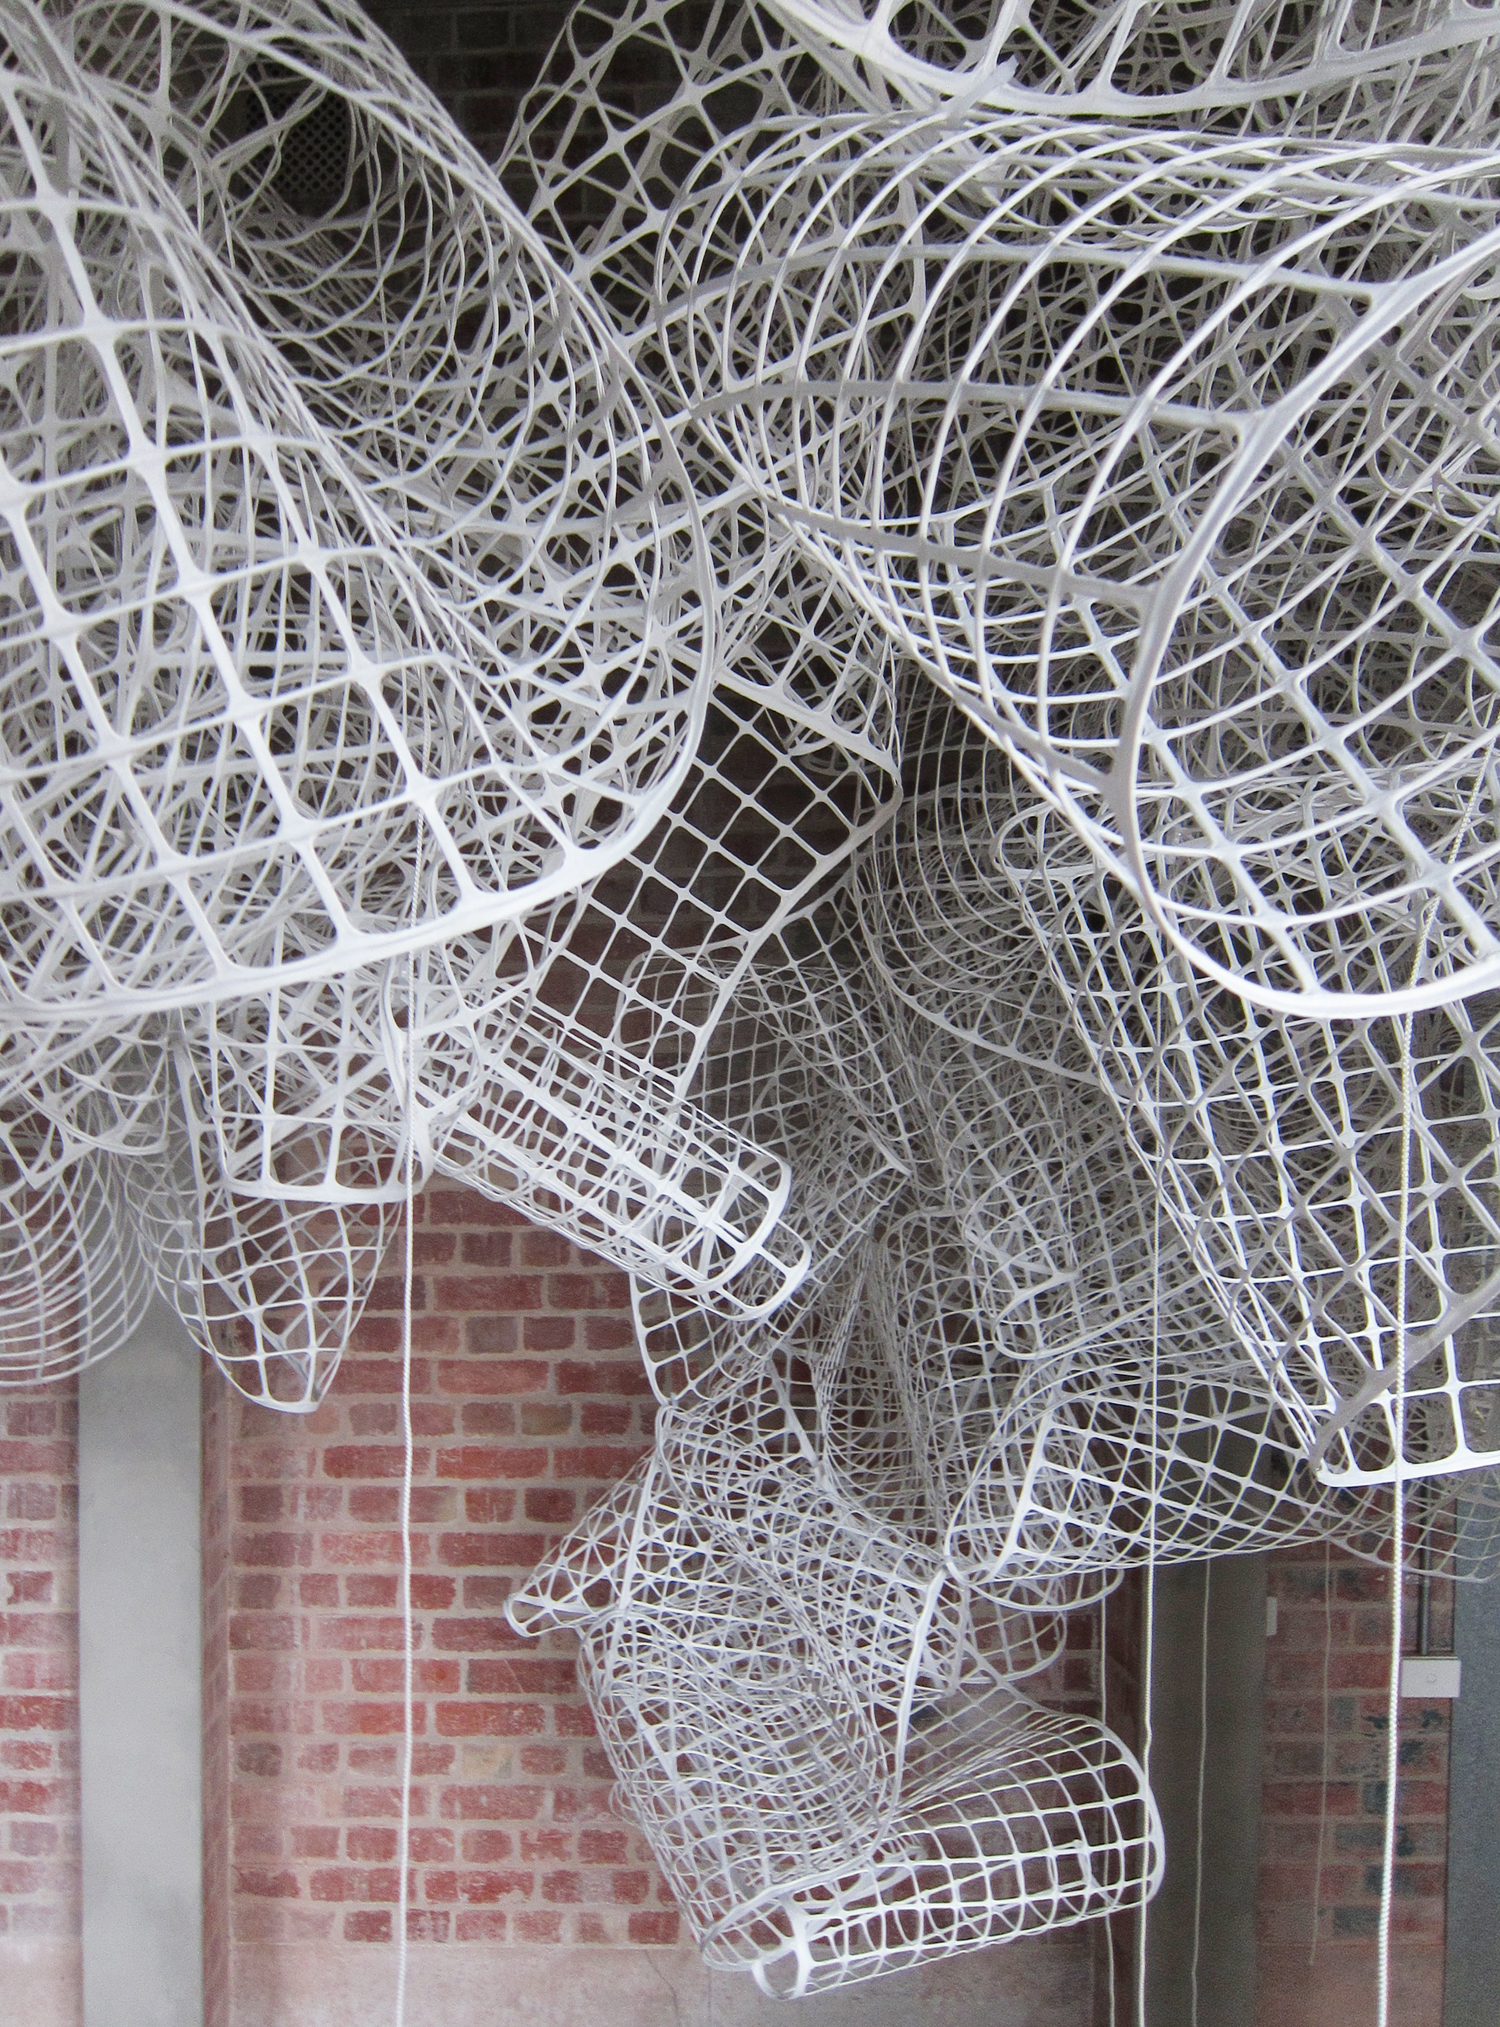   Runnel,  2011. Detail. Finalist in Substation Contemporary Art Prize.  Plastic trellis, rope, light. Dimensions variable. 